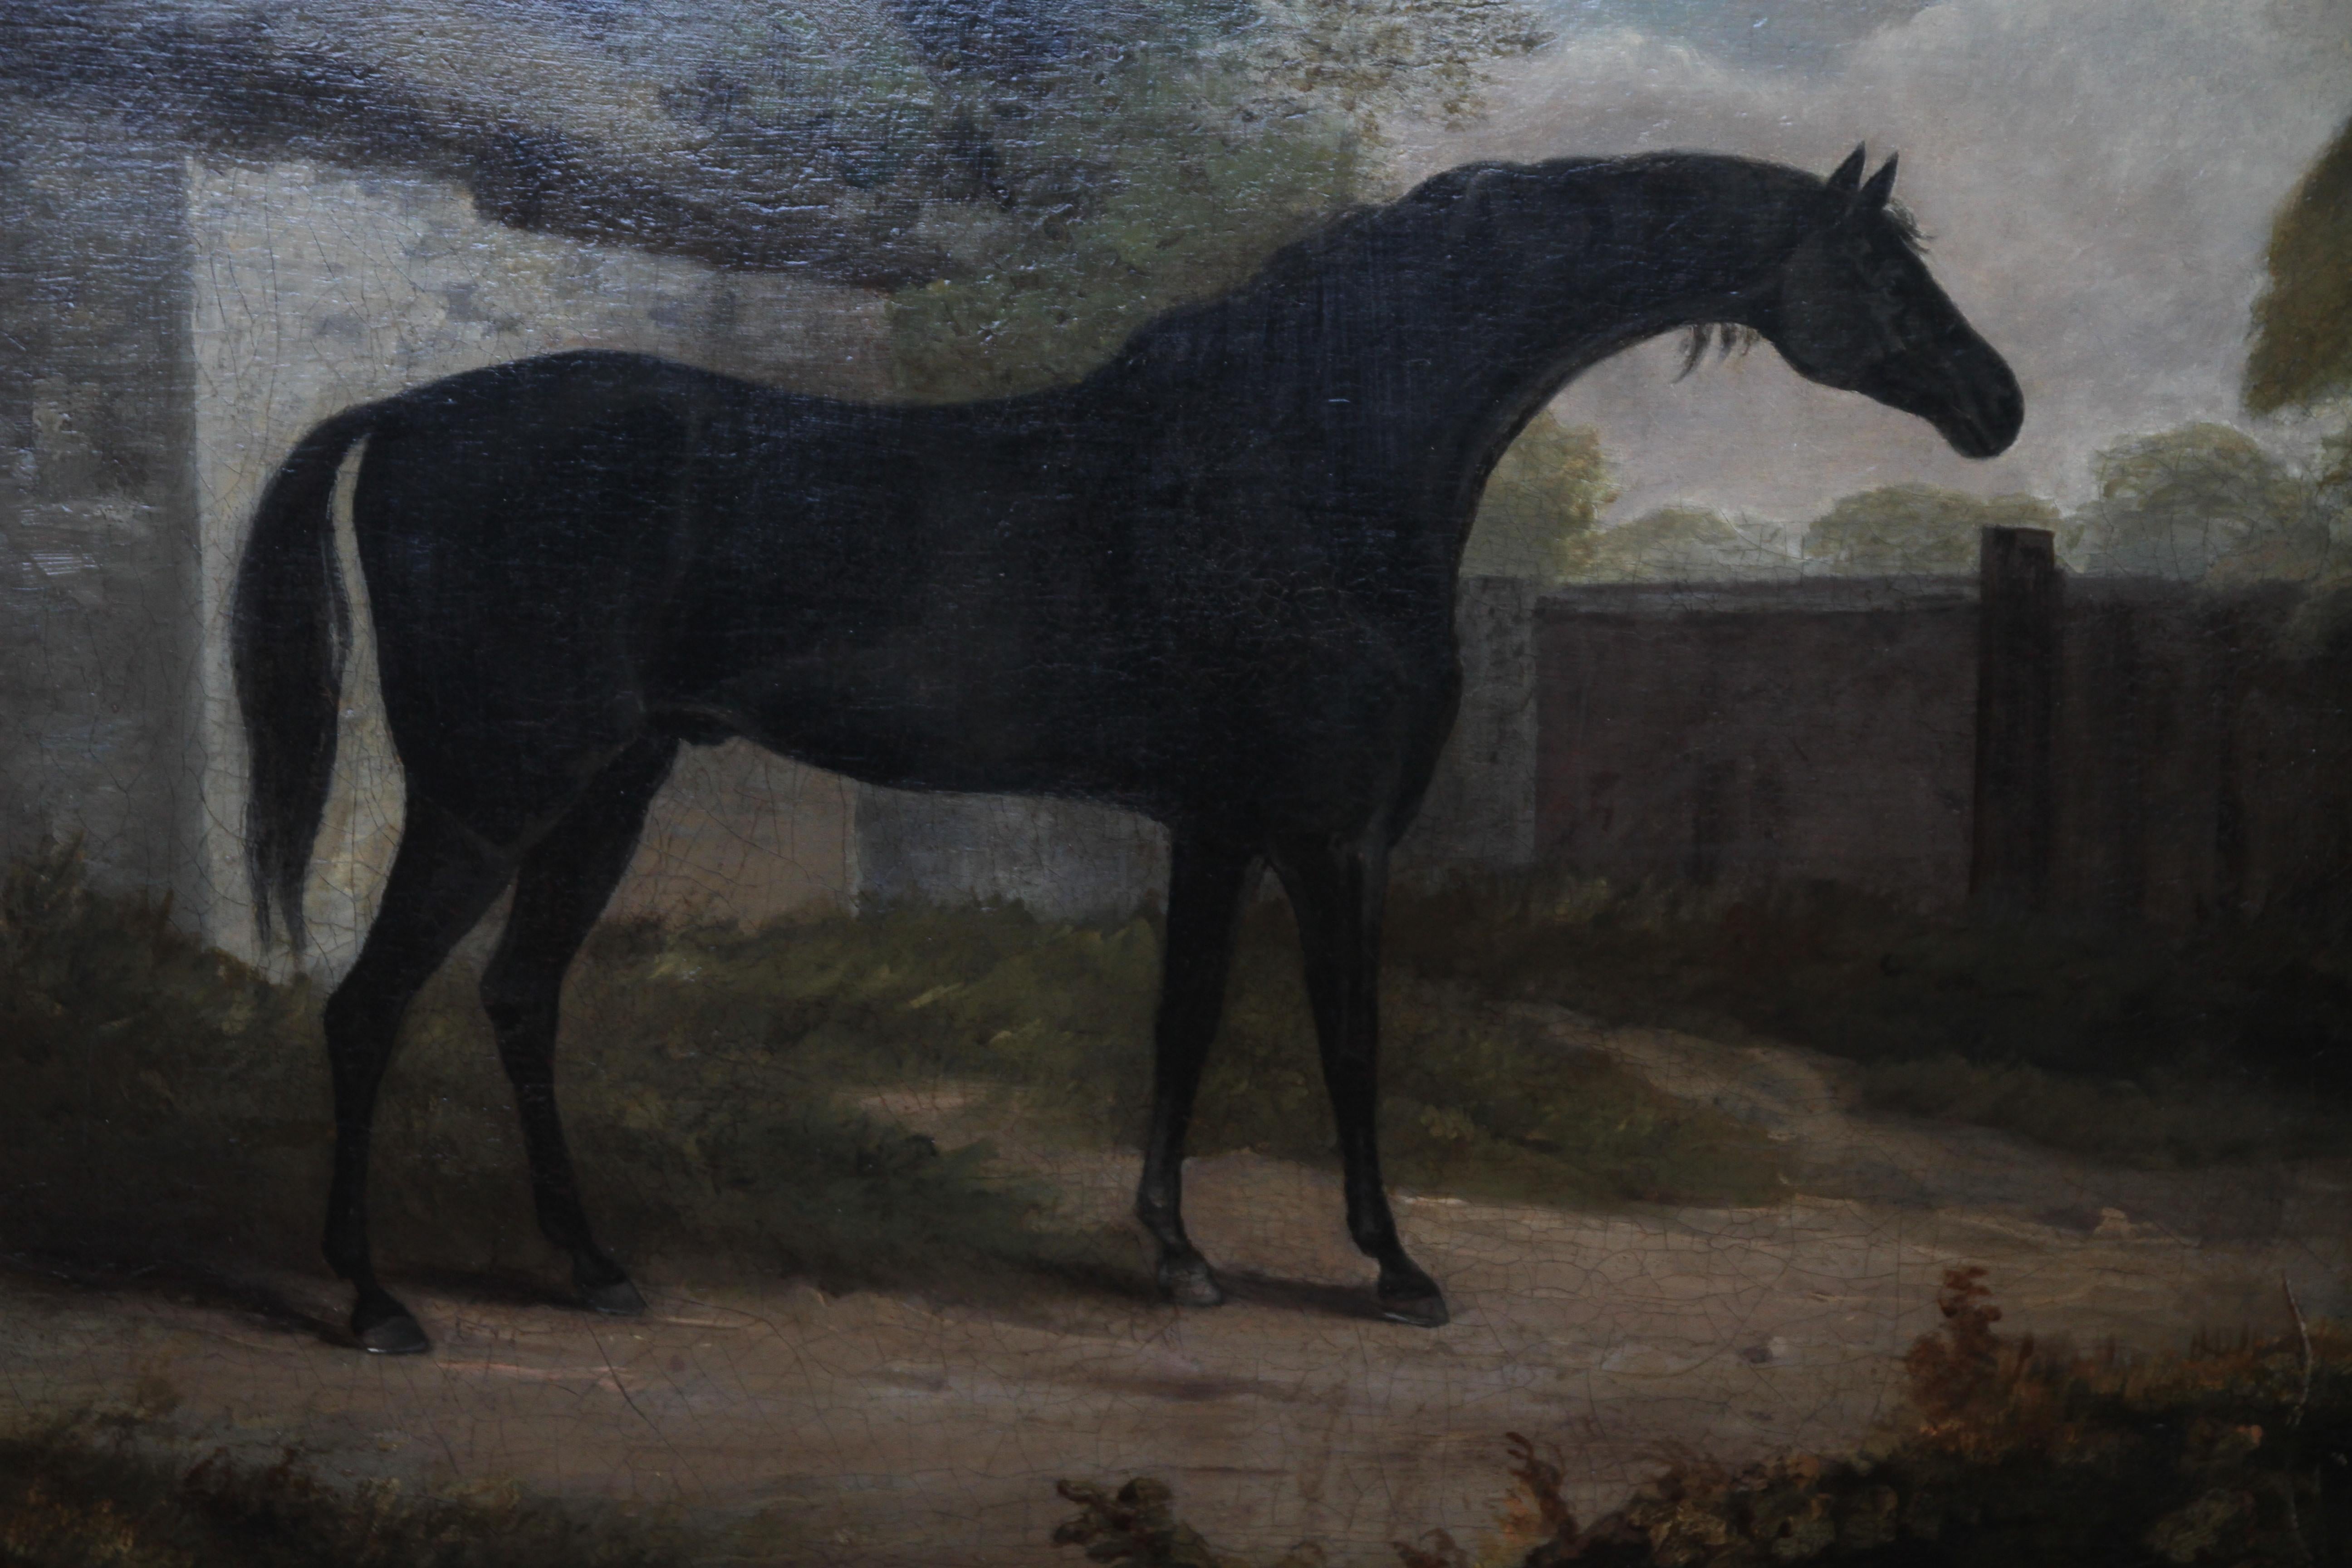 A fine British Old Master oil painting in the 18th century tradition of George Stubbs and Sawrey Gilpen which is attributed to John Boutlbee.  It depicts a black racehorse, Trumpator, who was a famous winner in the late 18th century. The paintings